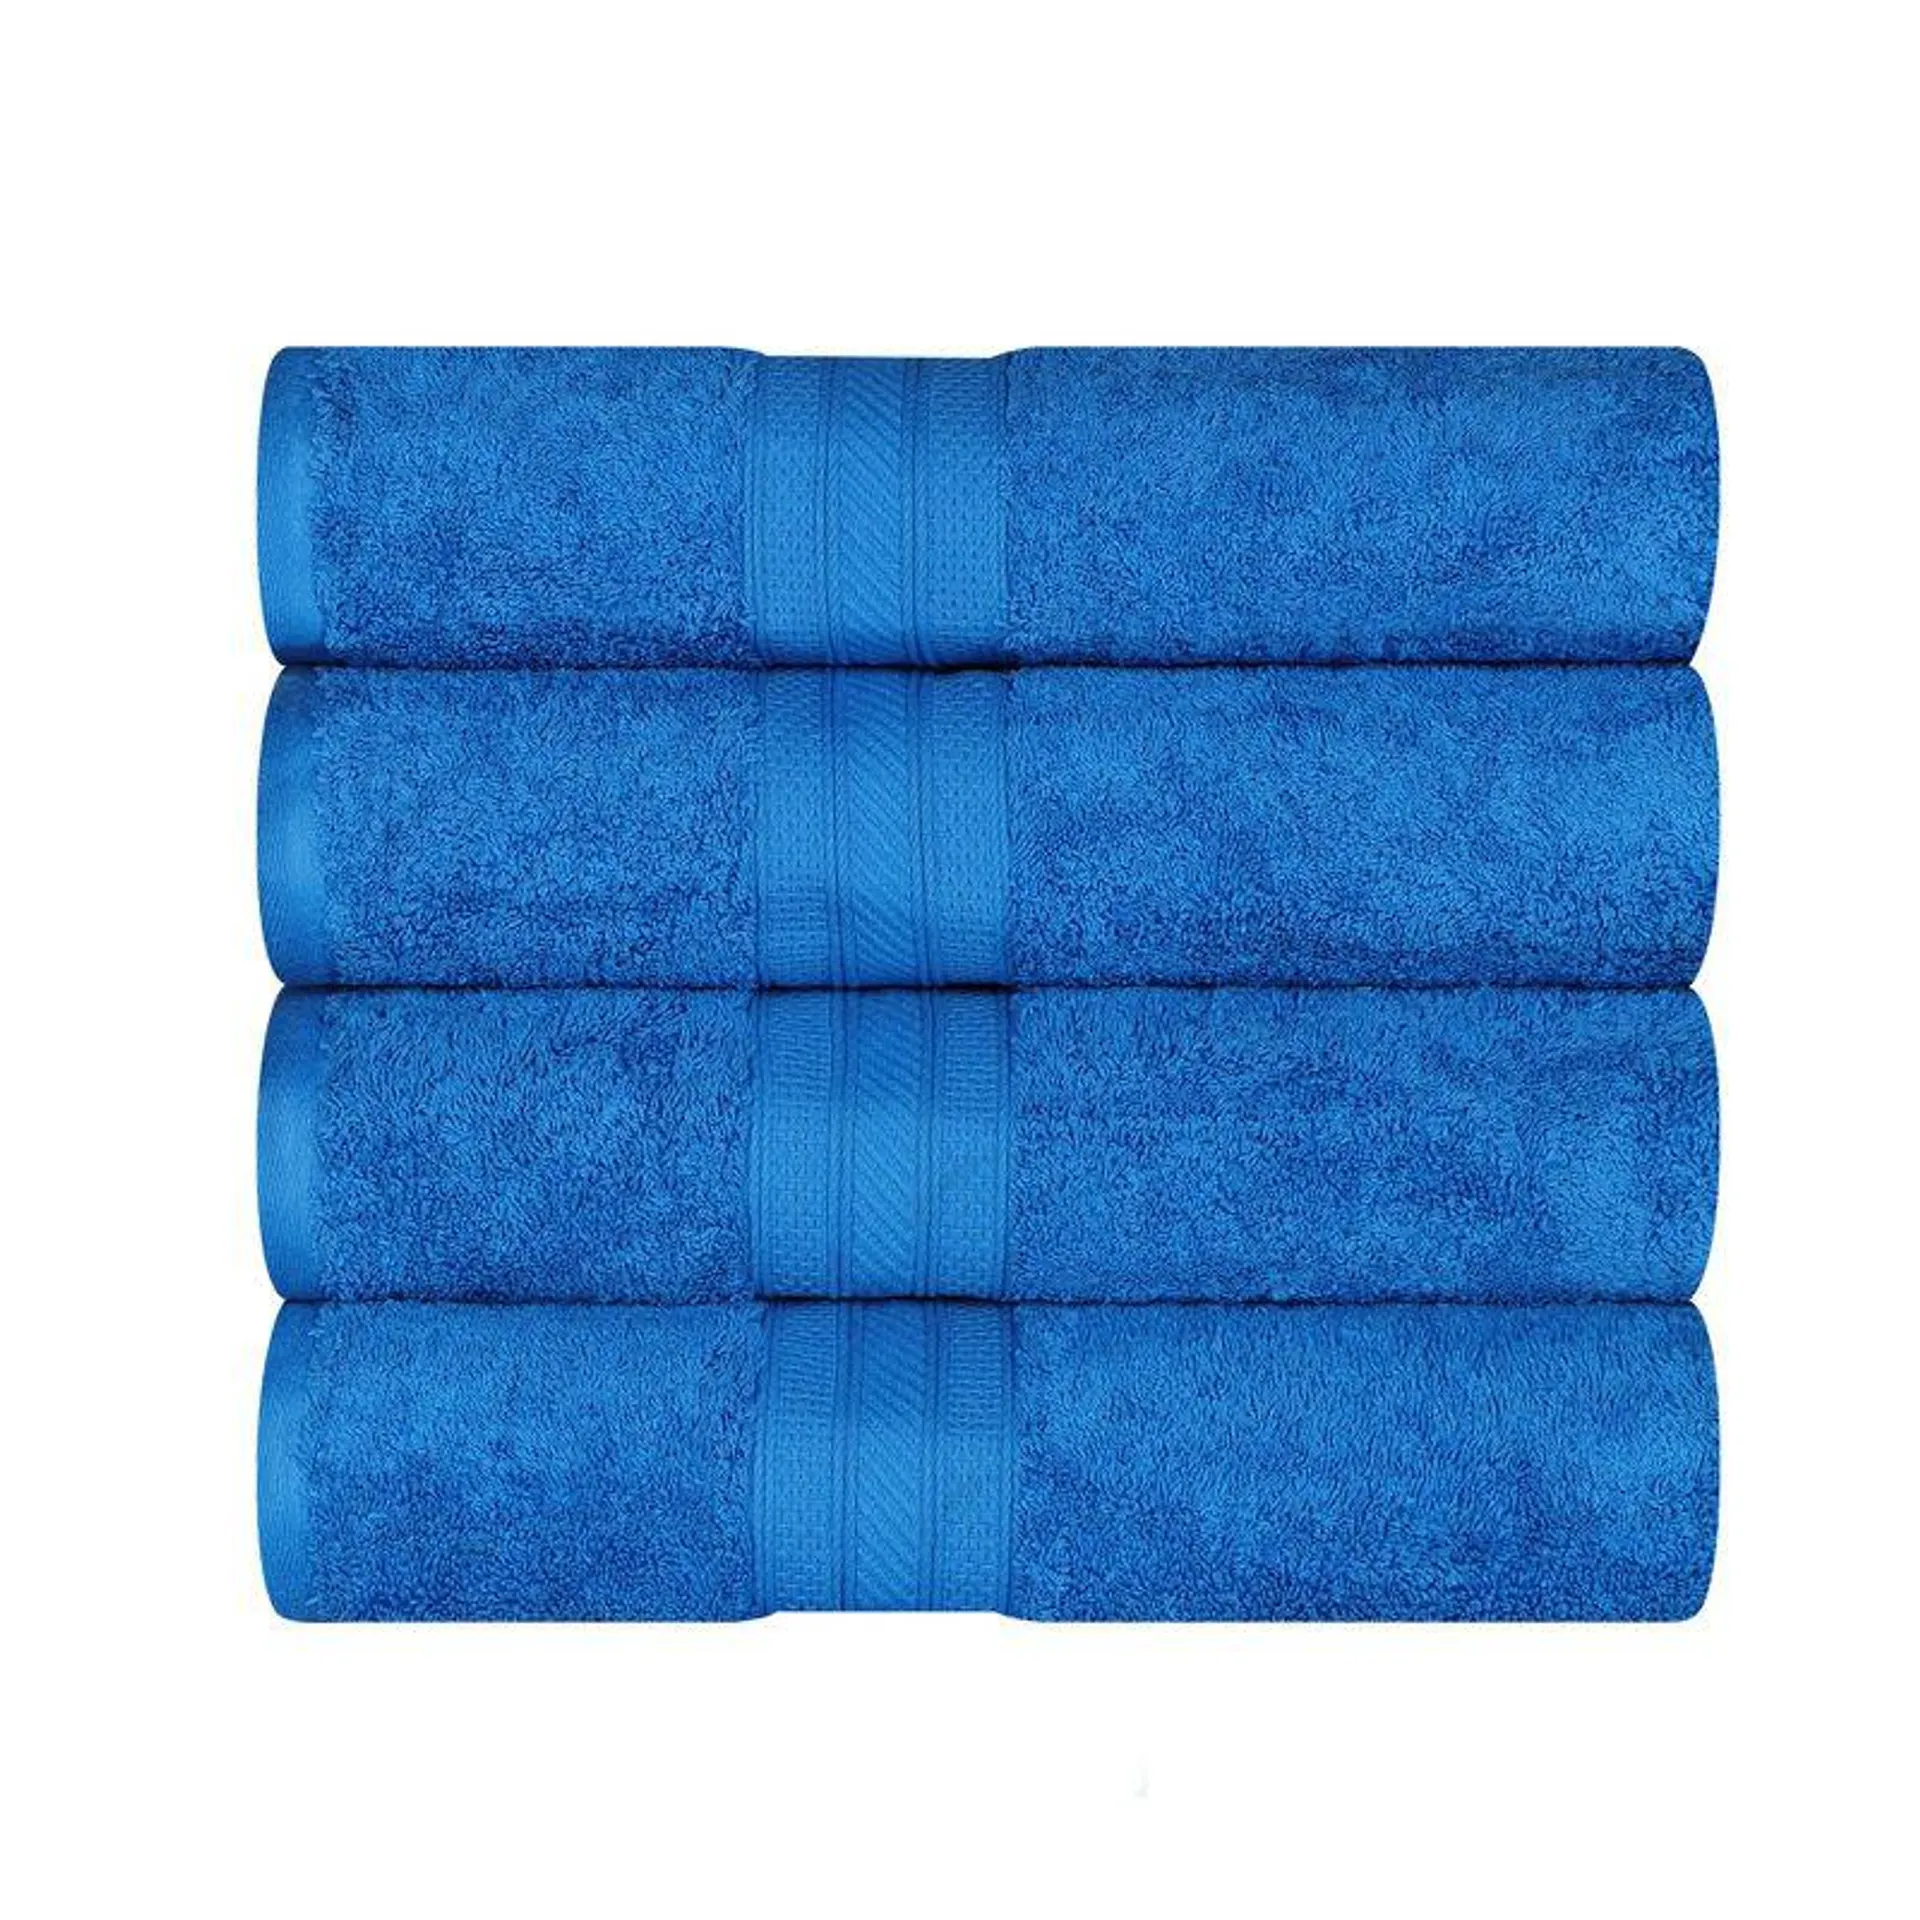 Cotton Solid Highly-Absorbent 4-Piece Bath Towel Set by Blue Nile Mills